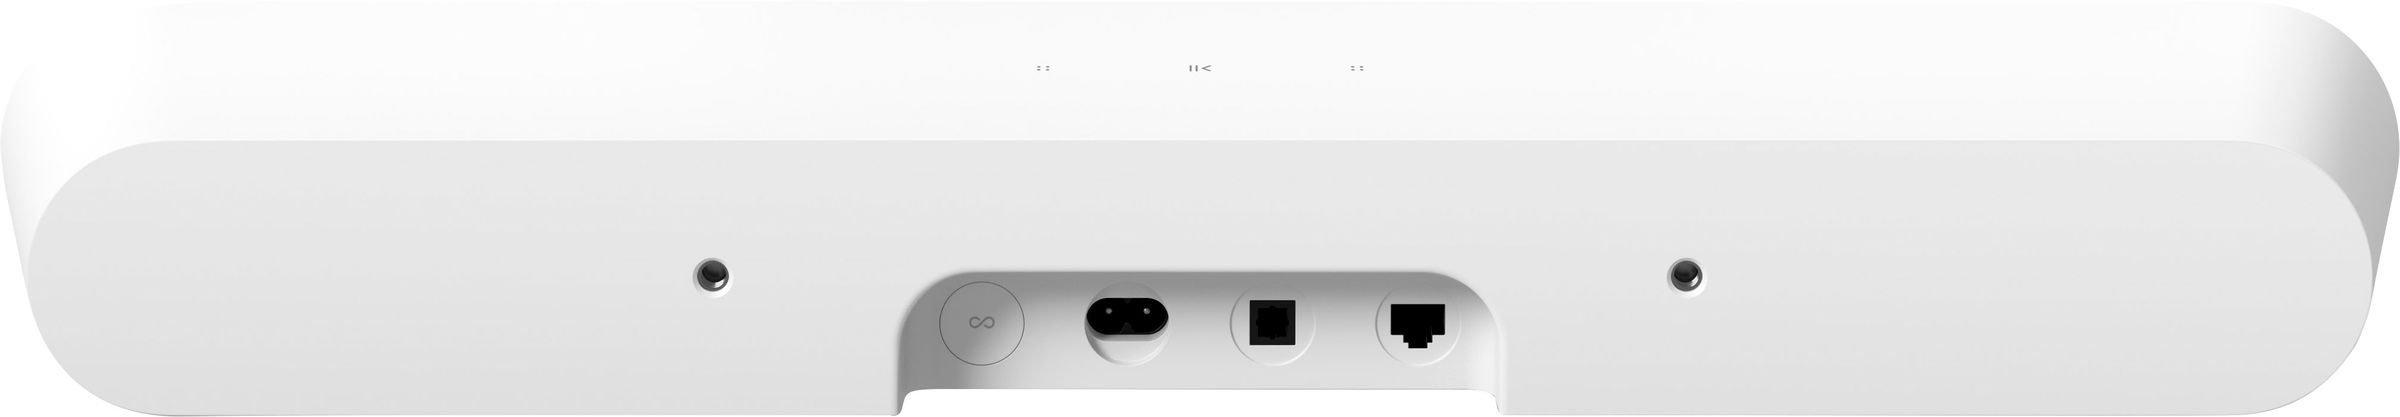 The Sonos Ray will connect to TVs via the optical port.